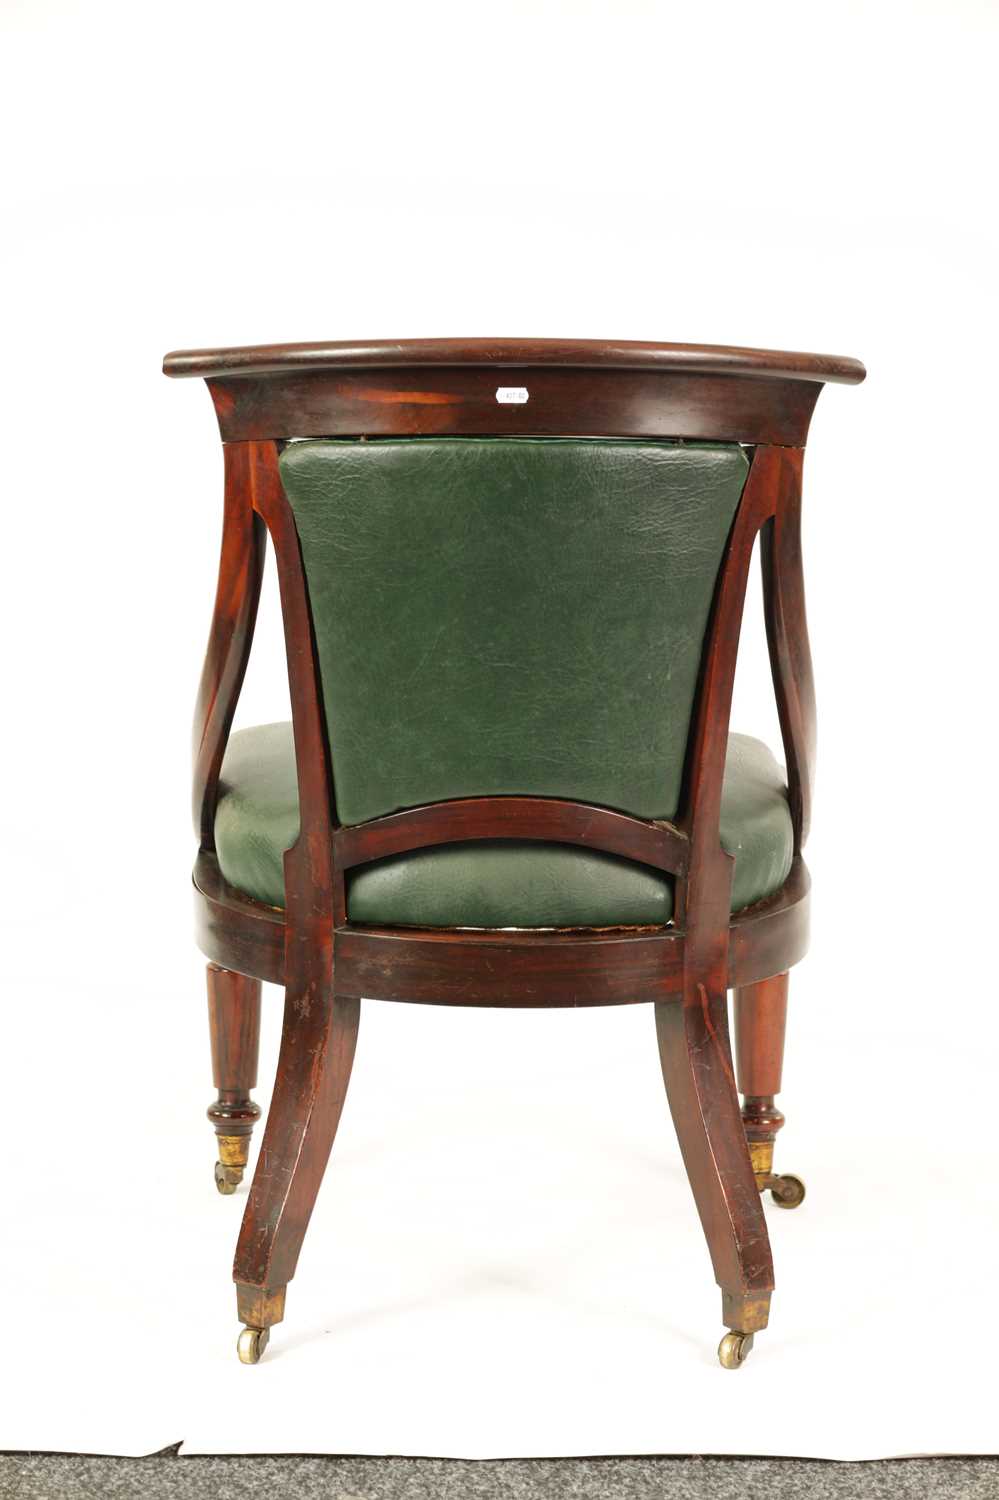 AN UNUSUAL REGENCY GONÇALO-ALVES TIMBER LIBRARY CHAIR IN THE MANNER OF GILLOWS - Image 7 of 7